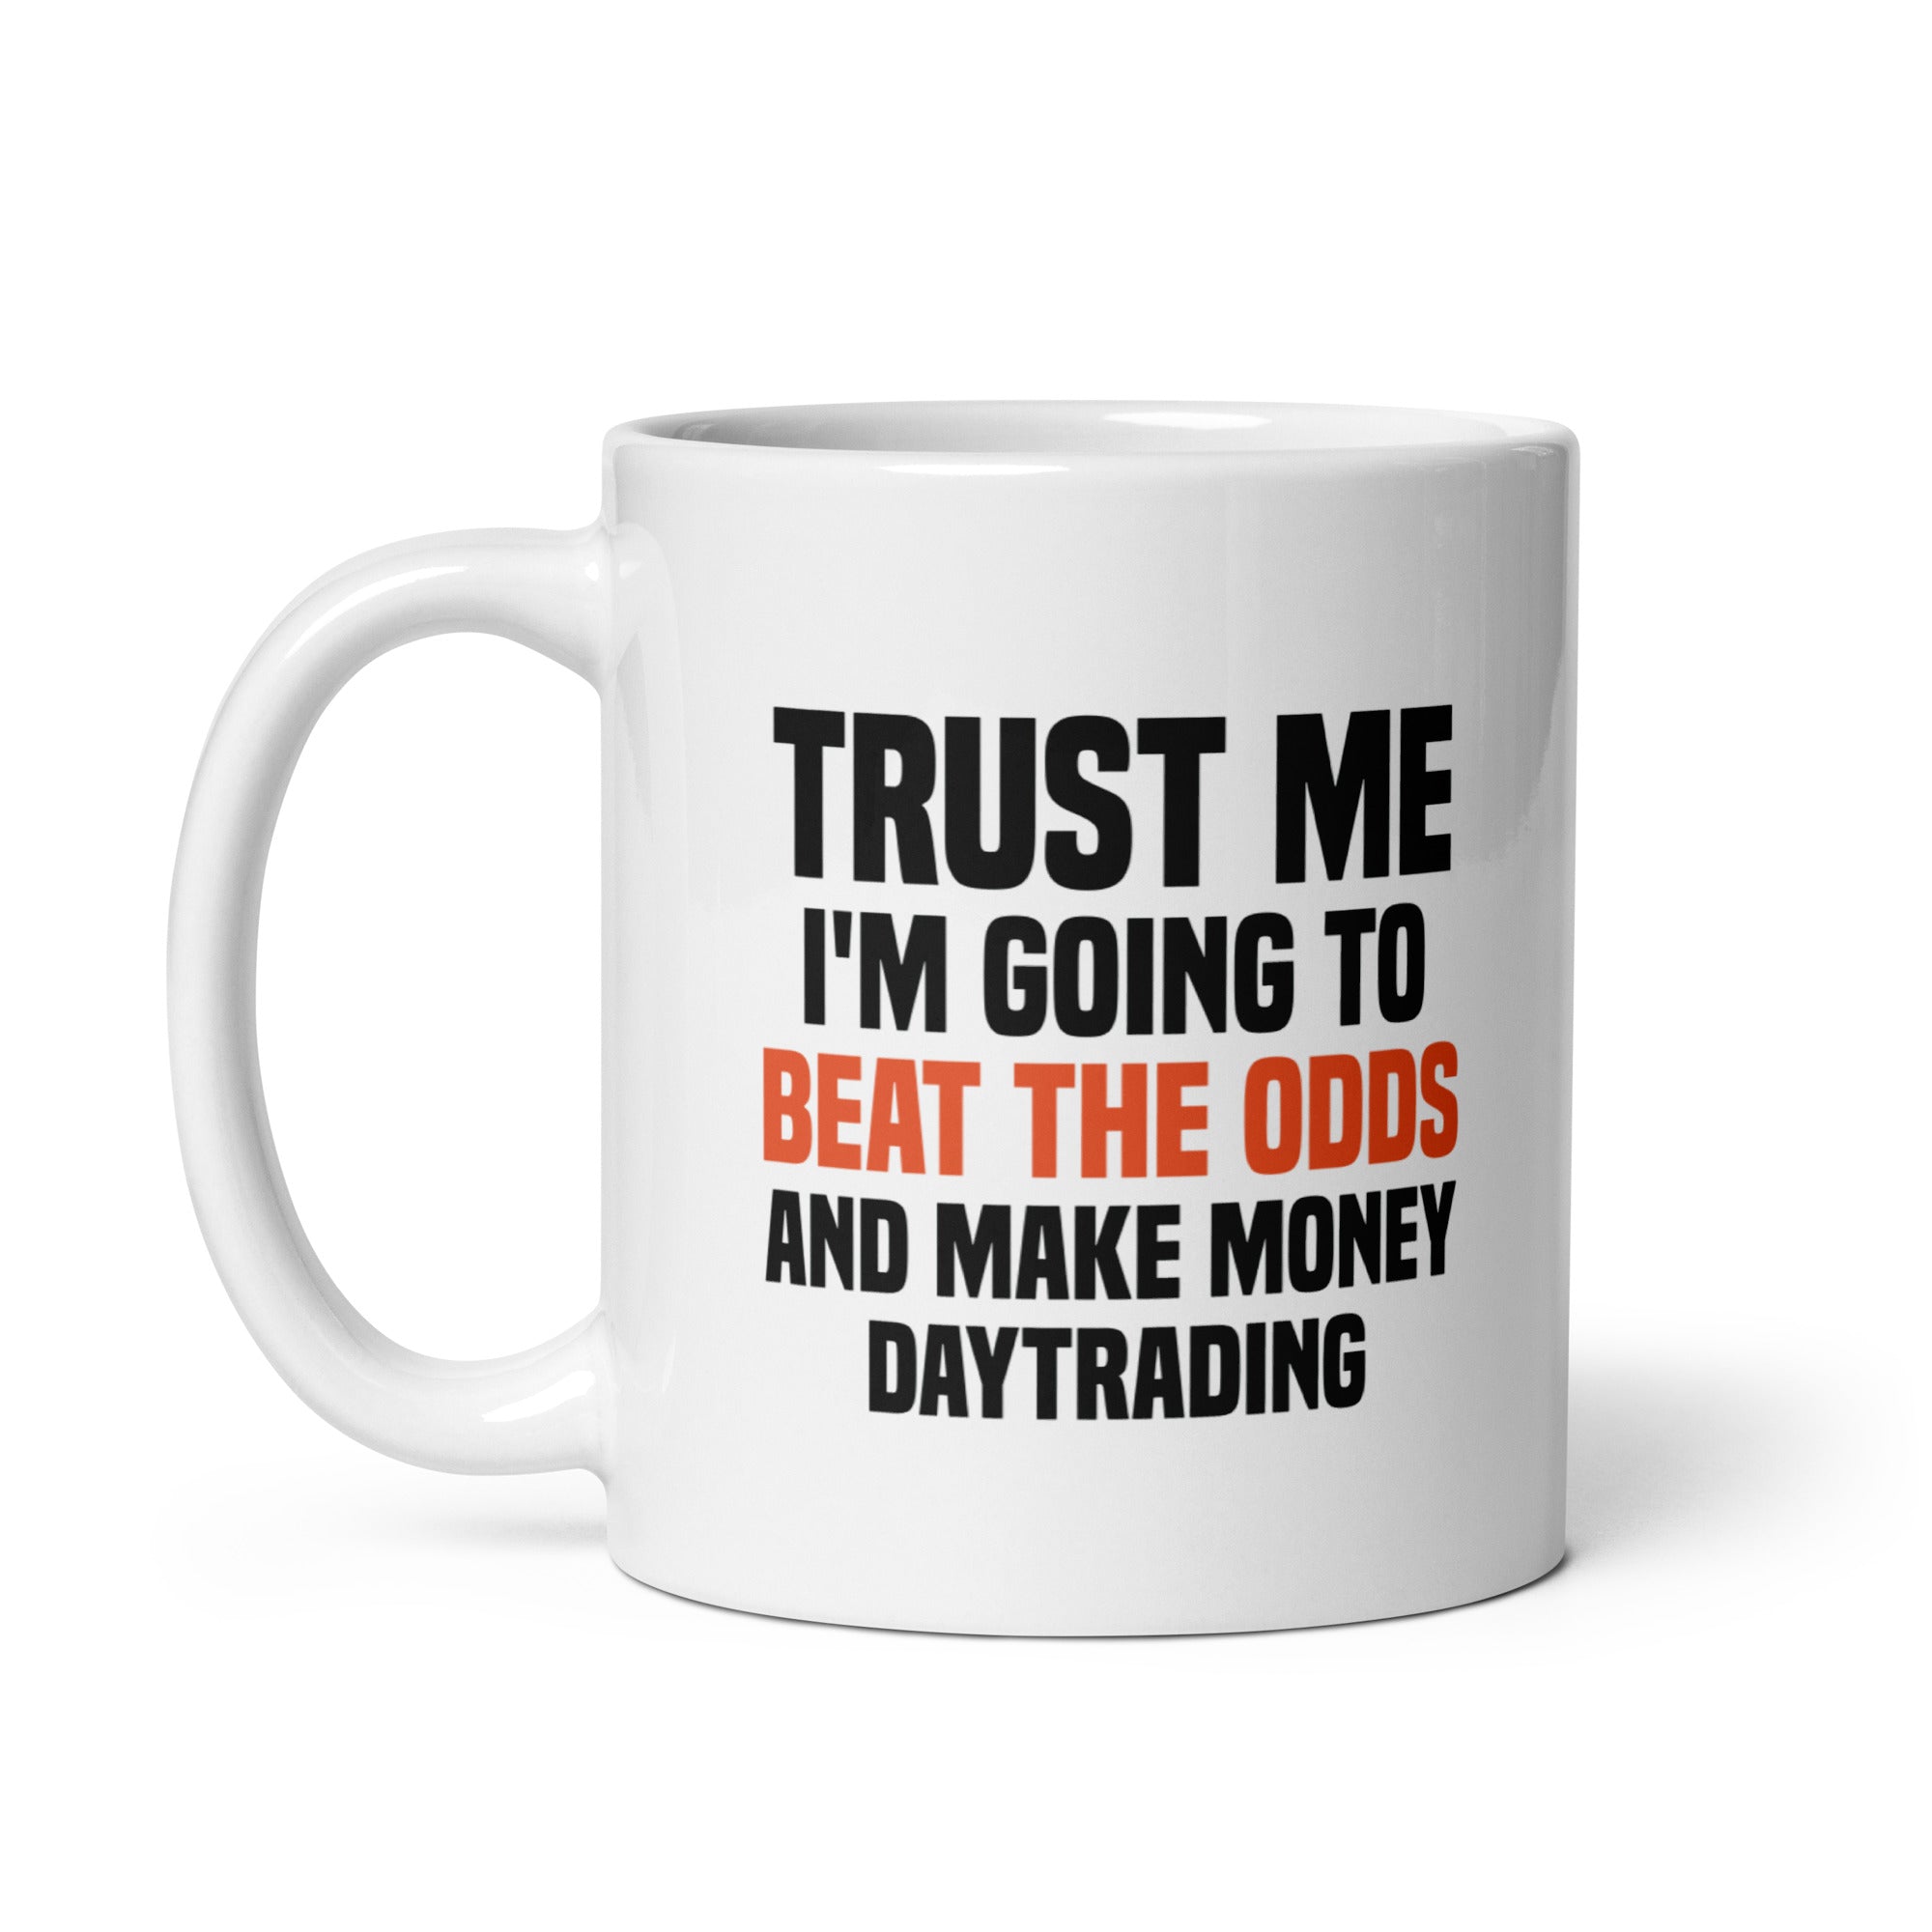 White glossy mug | Trust me I am going to beat the odds and make money daytrading